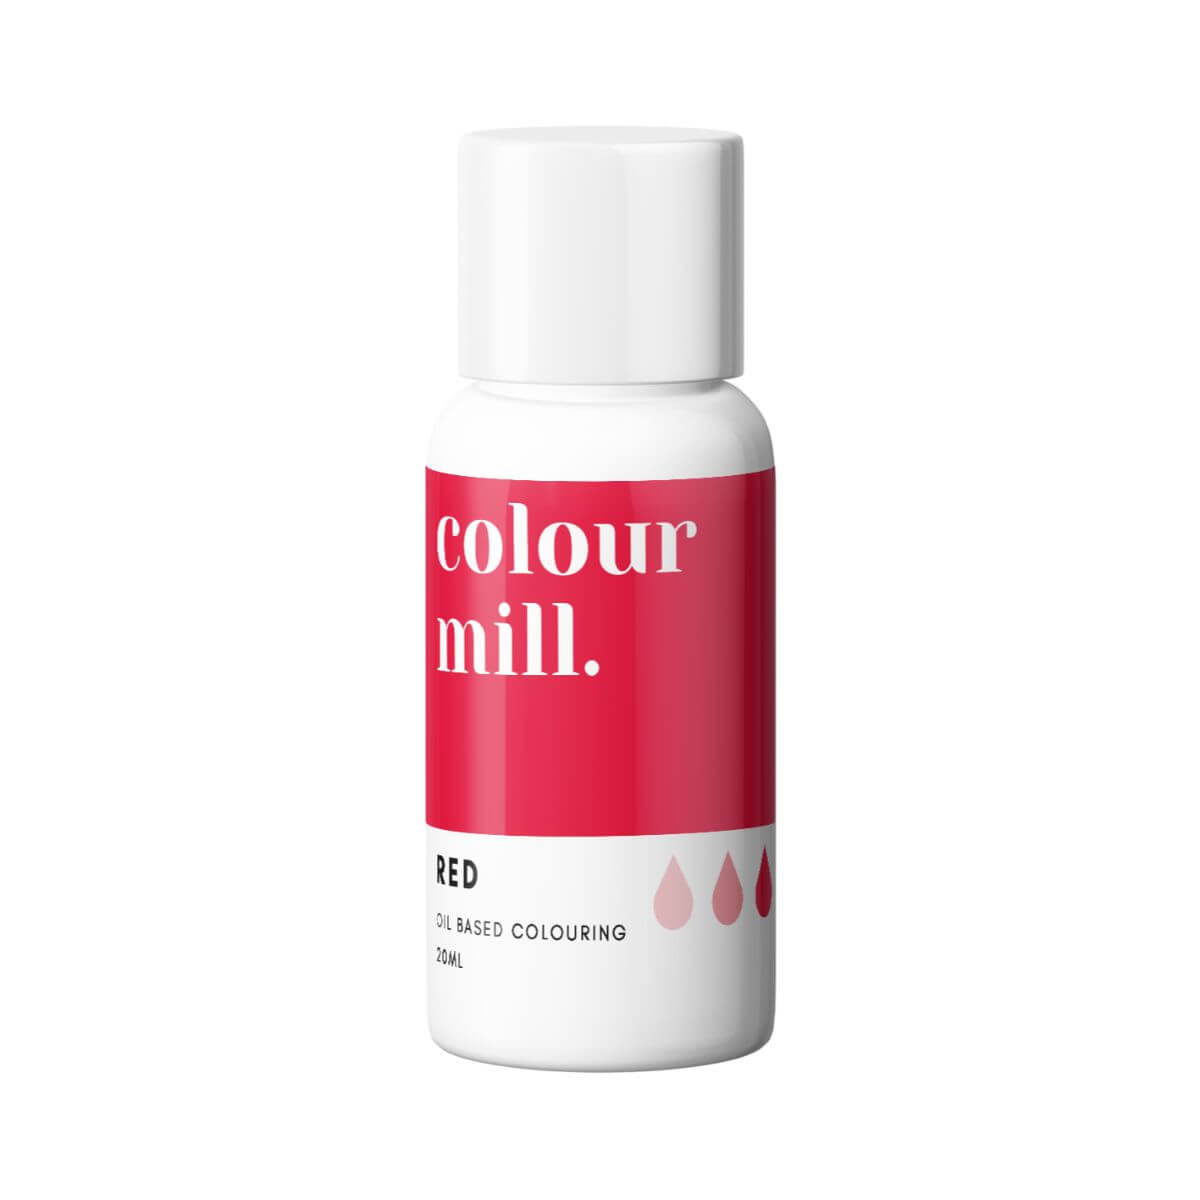 Colour Mill Next Generation Oil Based Icing Colouring - 20mlColour Mill Next Generation Oil Based Icing Colouring - 20ml